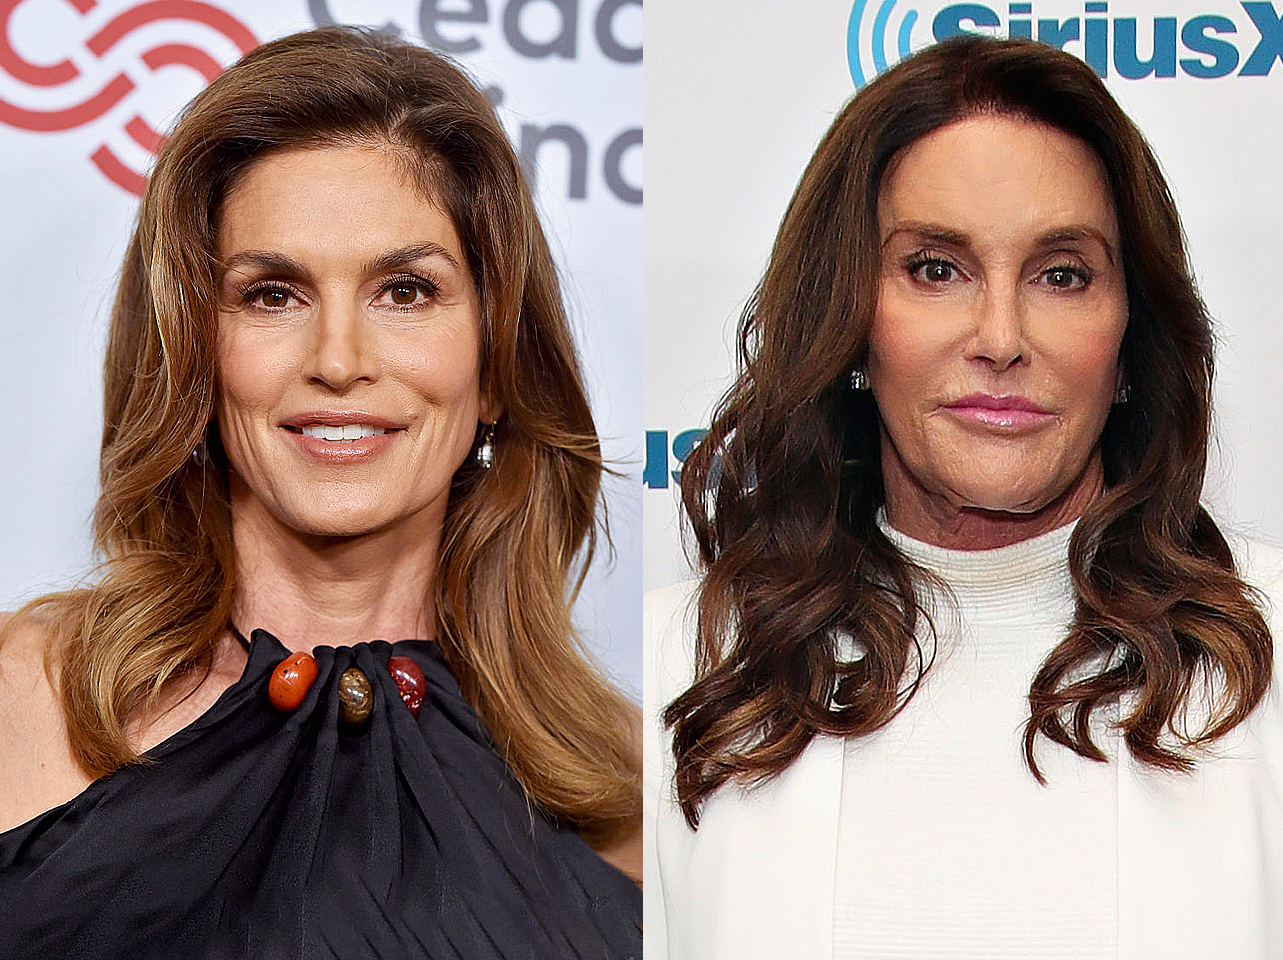 Caitlyn Jenner and Cindy Crawford | Source: Getty Images